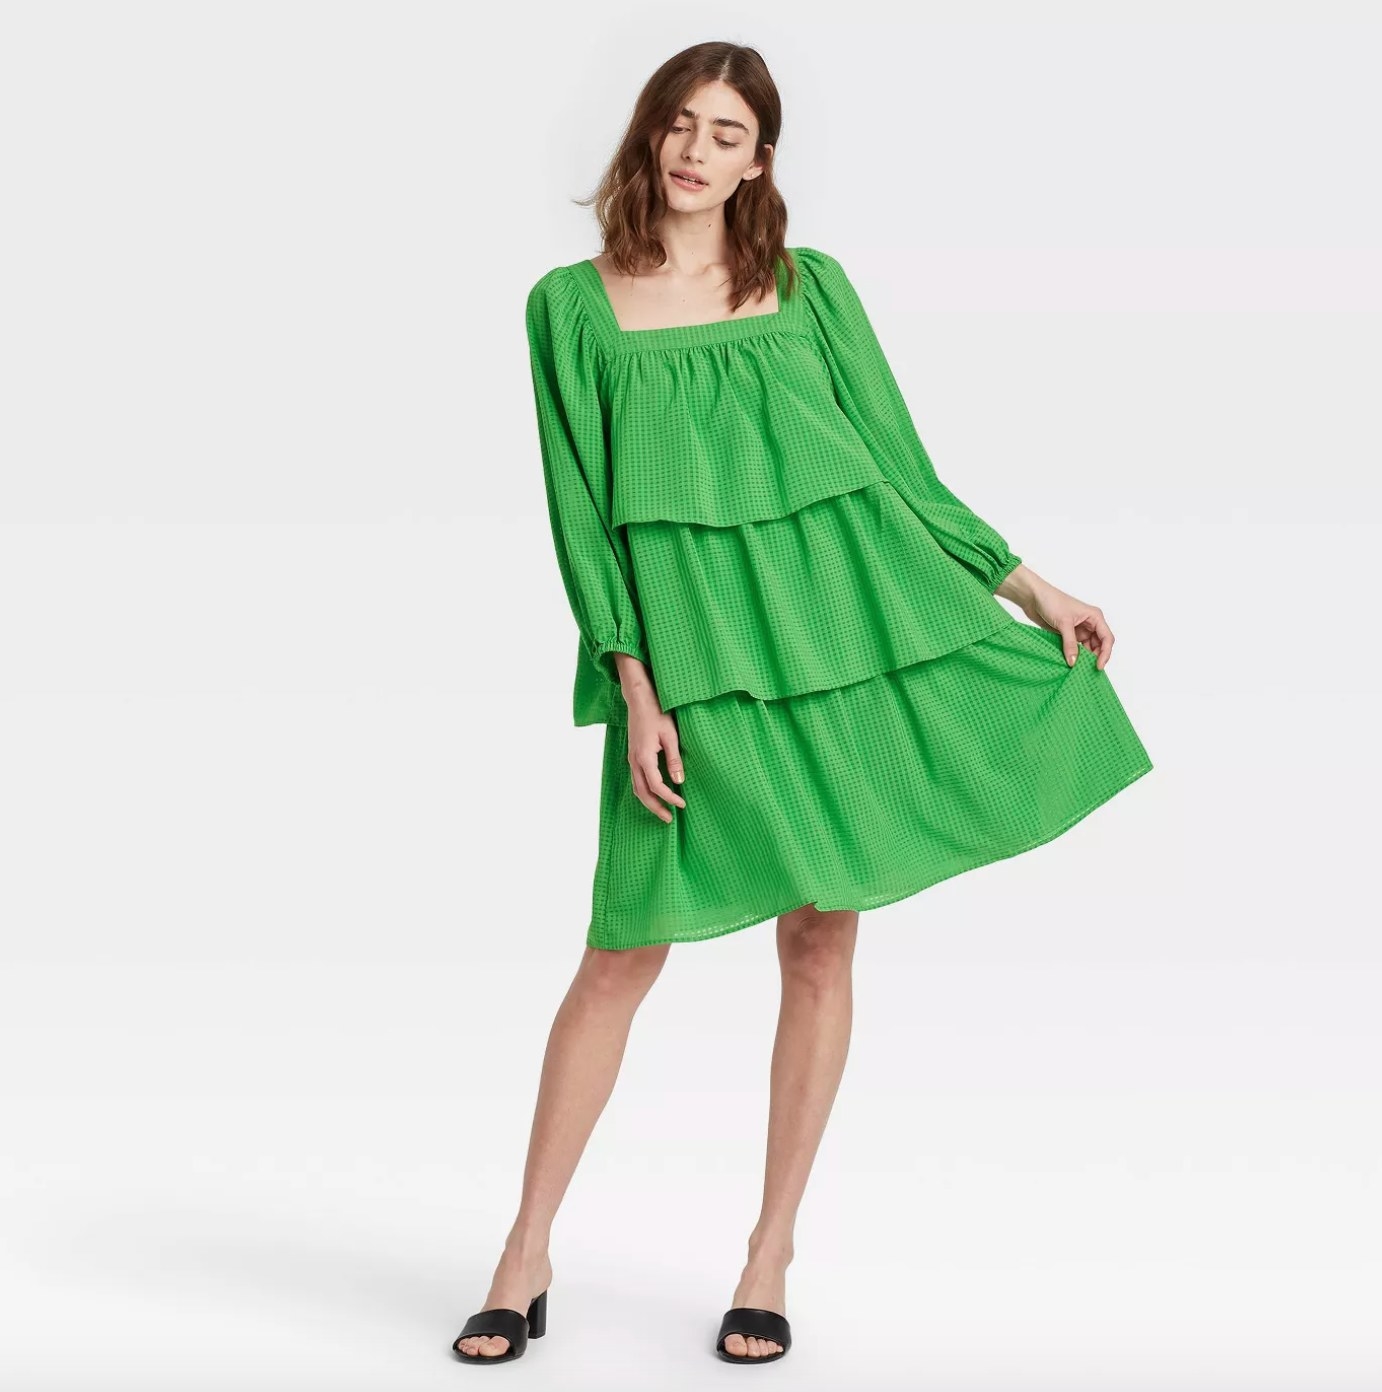 The tiered green dress